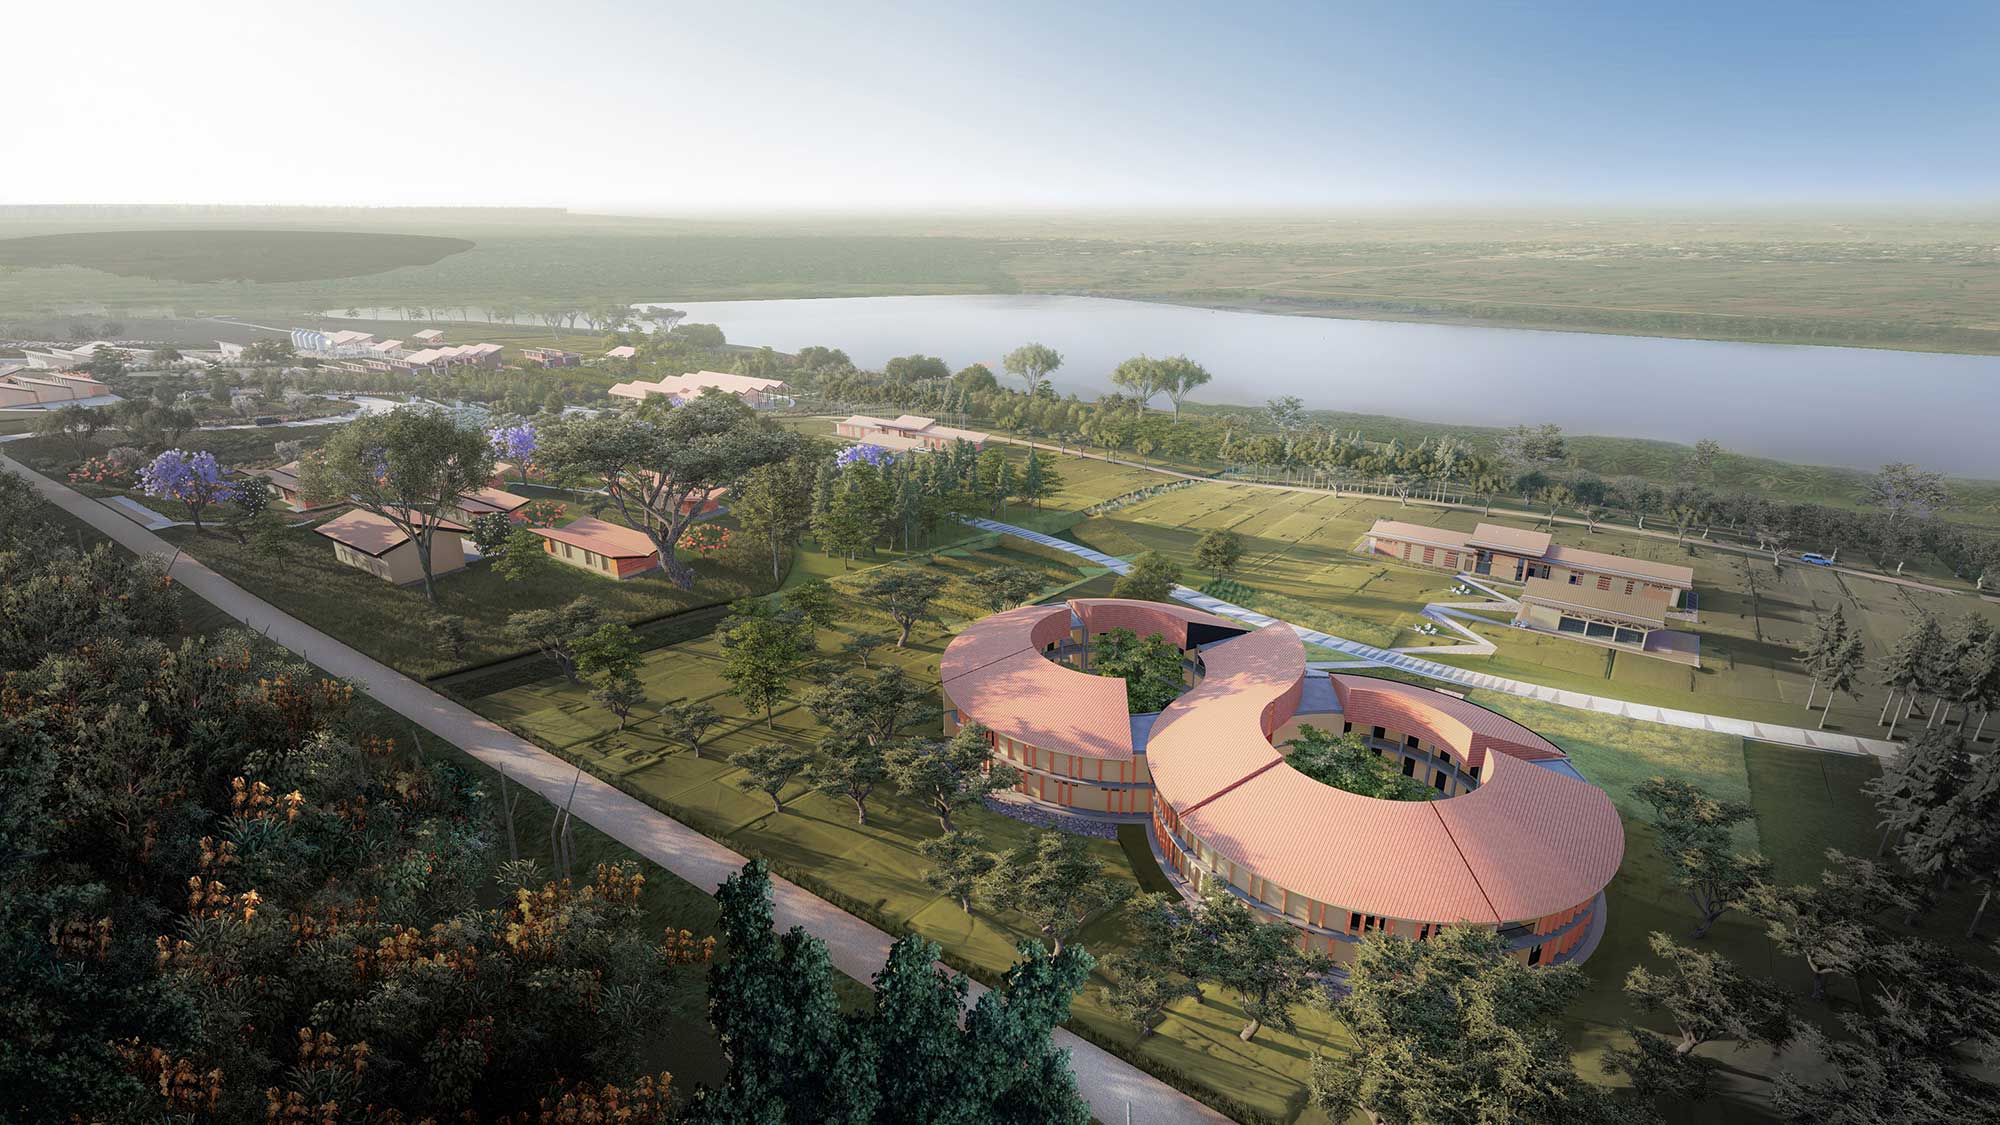 The Rwanda Institute for Conservation Agriculture. Copyright: Mass Design Group